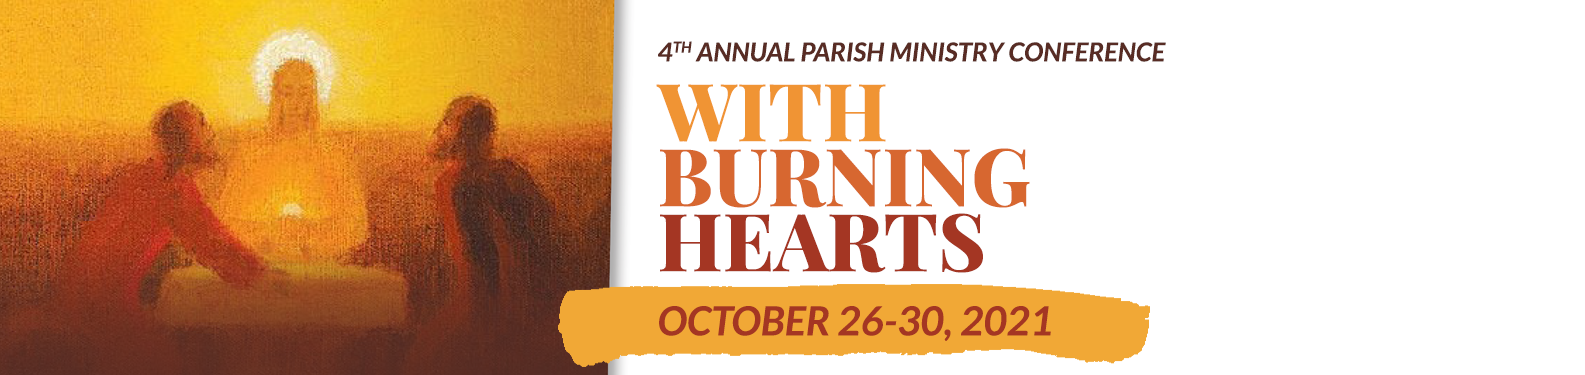 2021 Parish Ministry Conference: With Burning Hearts